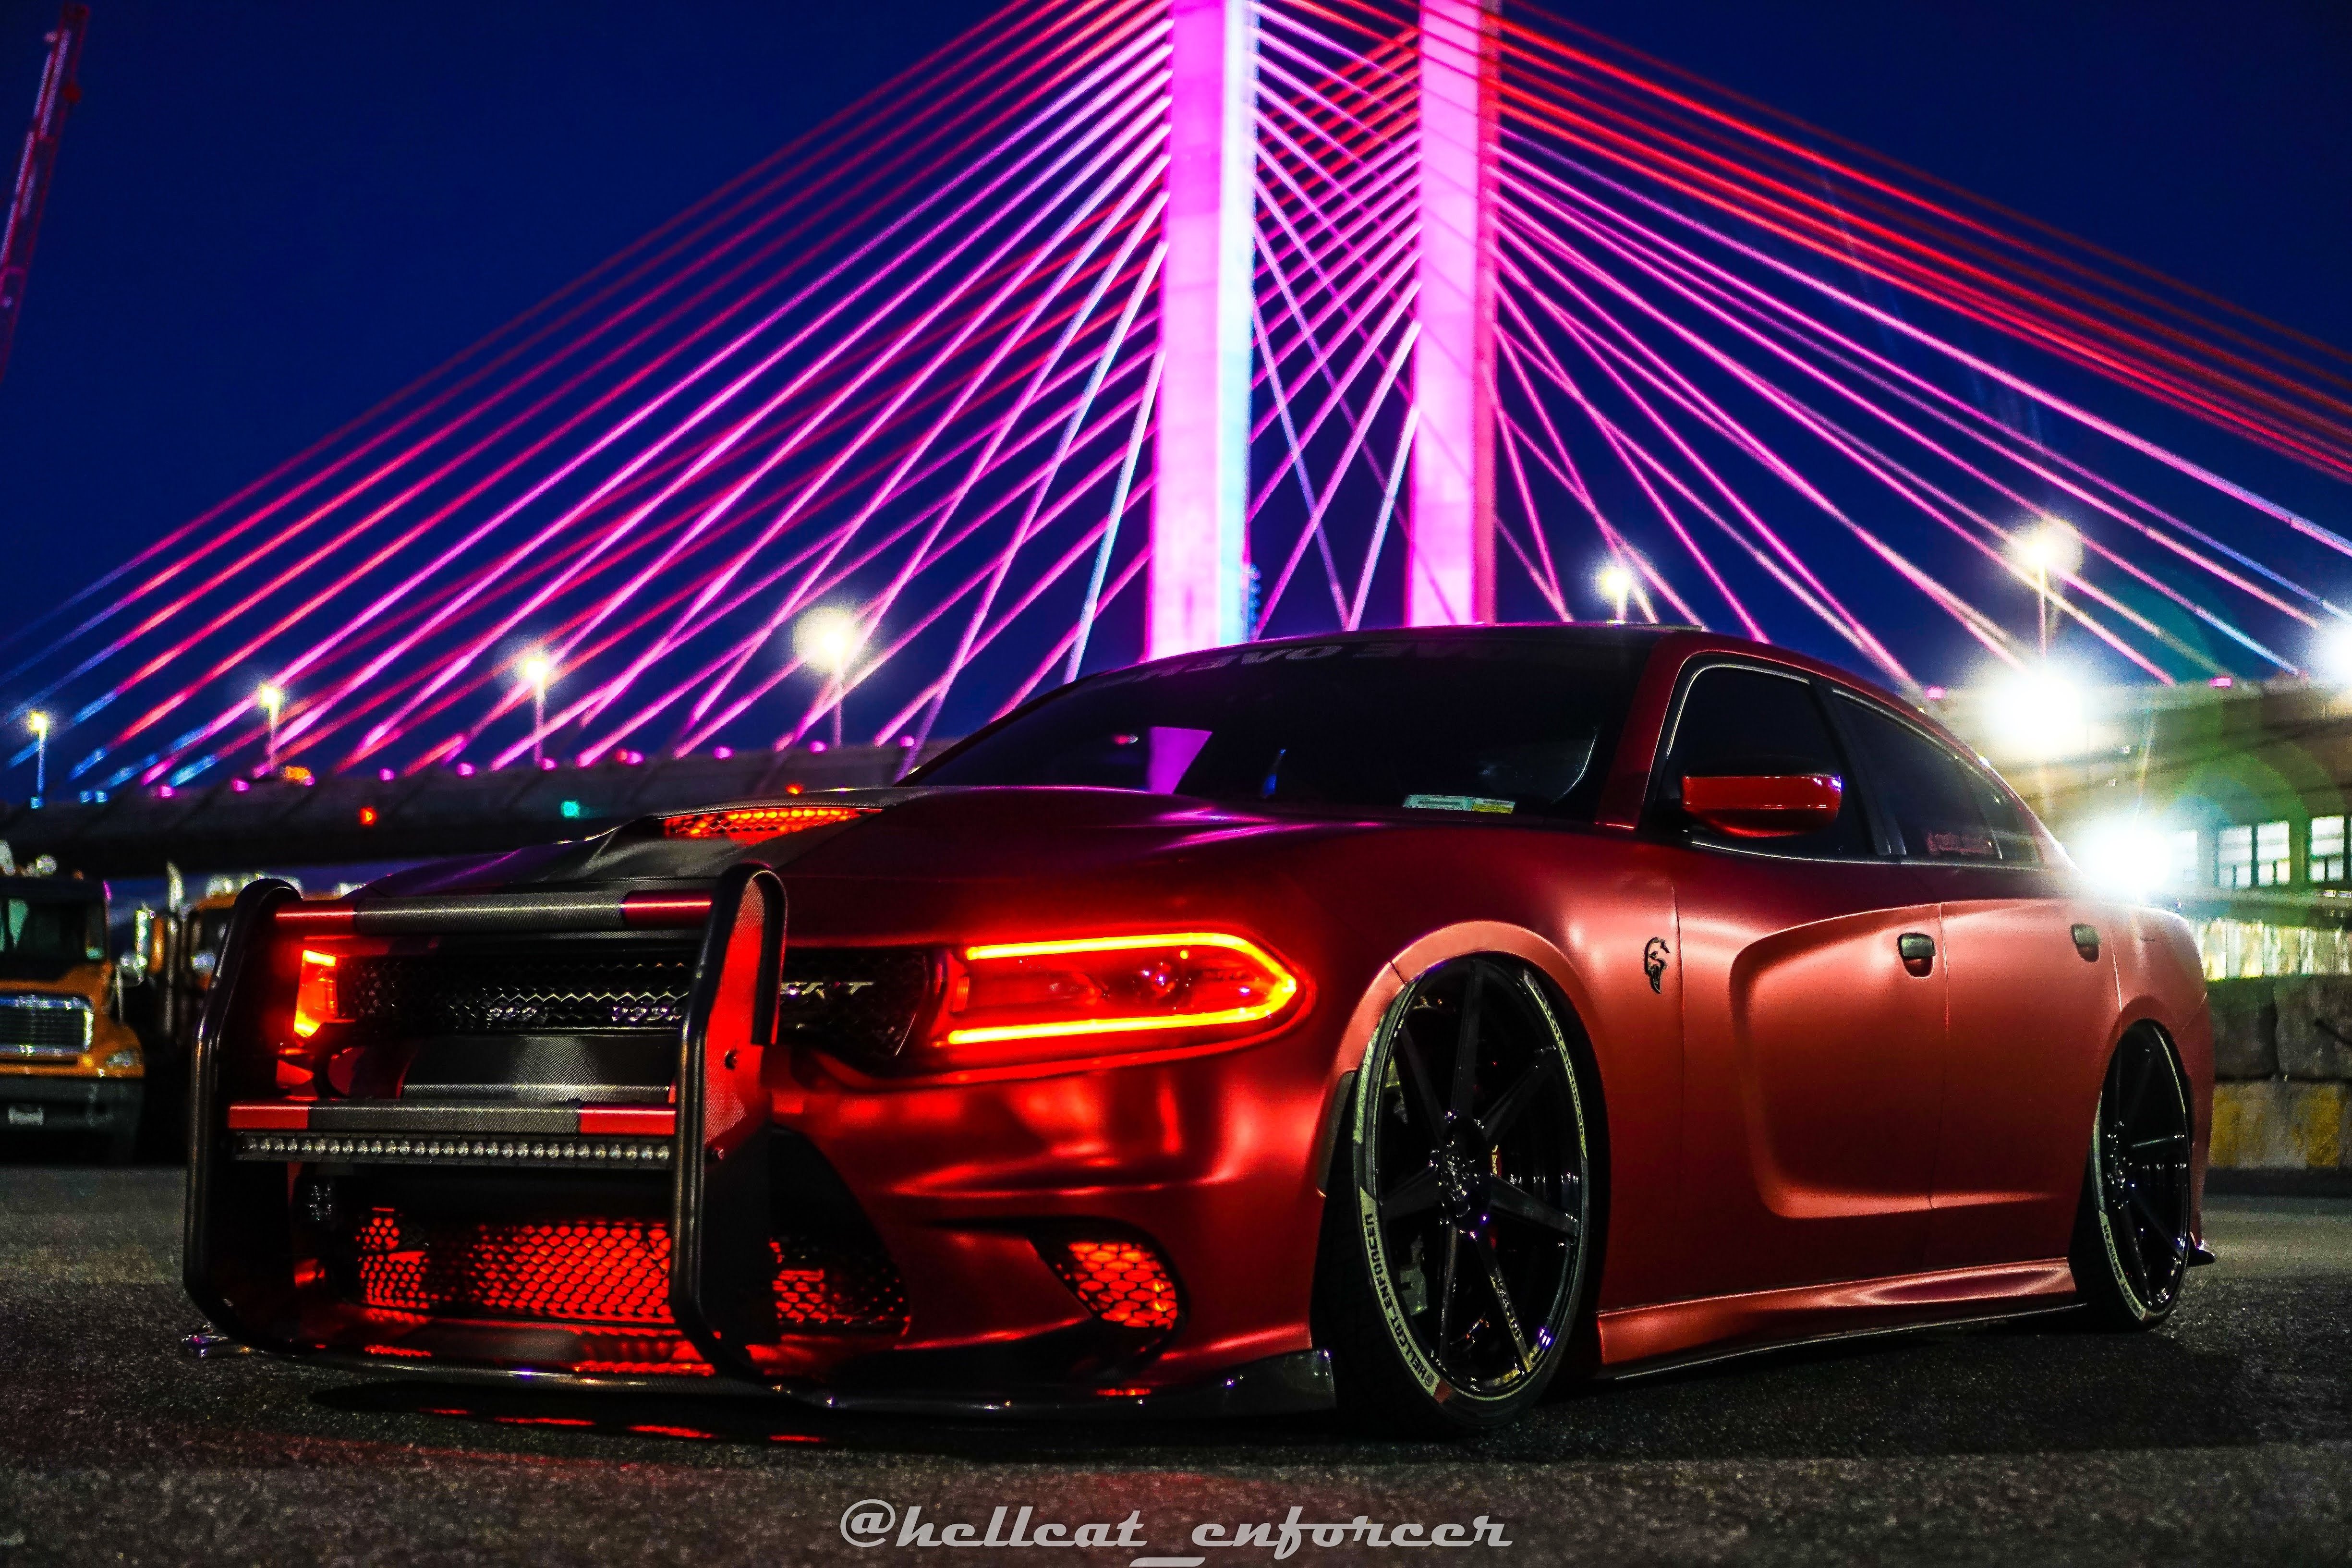 Red Dodge Charger with Custom Grille Guard - Photo by @hellcat_enforcer